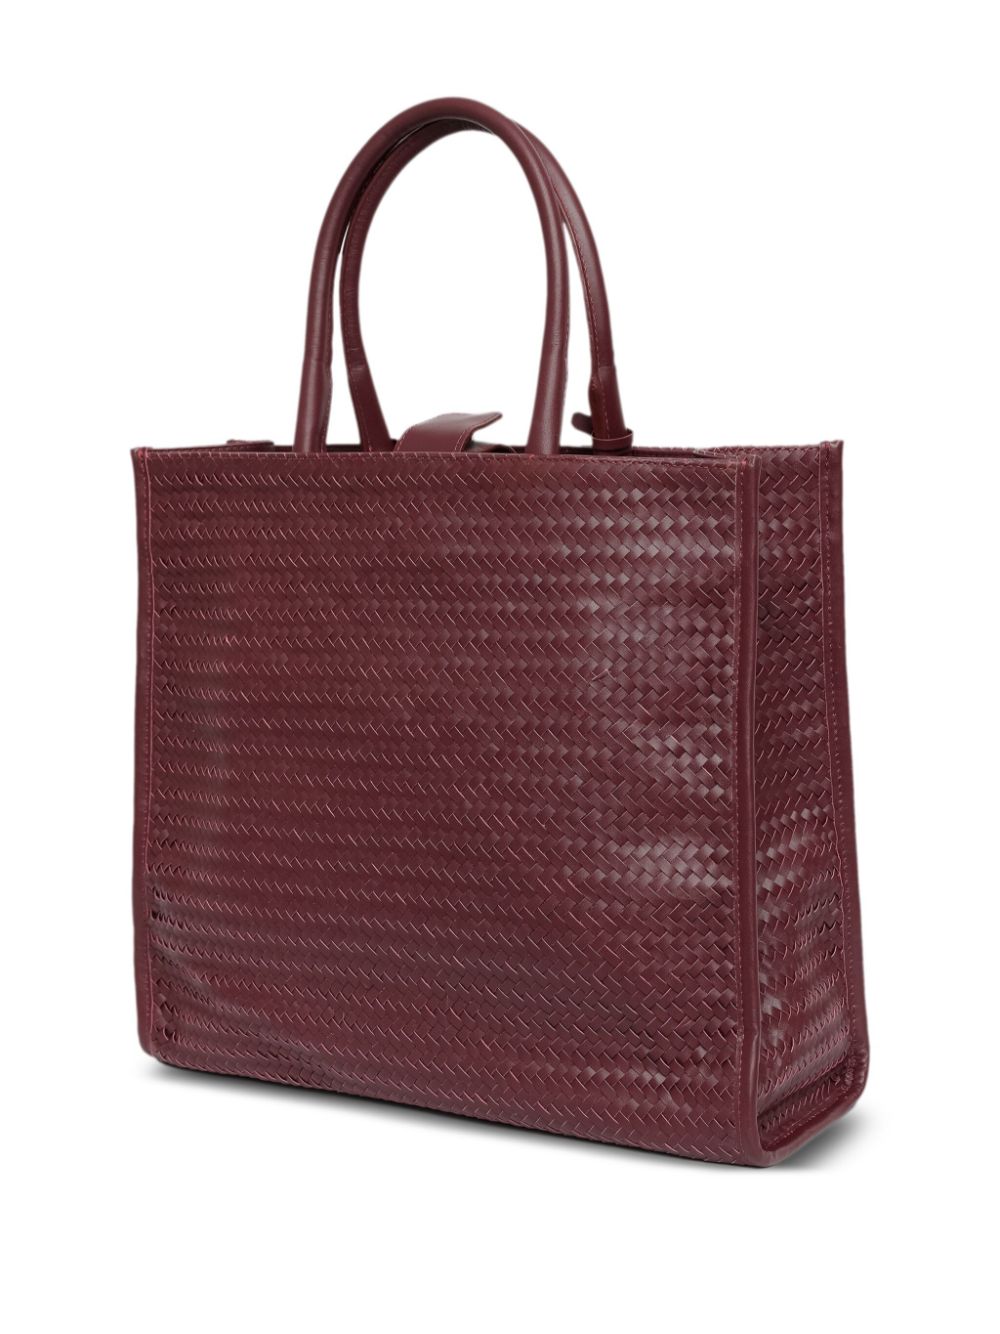 Sarah Chofakian Tresse woven leather tote bag - Rood